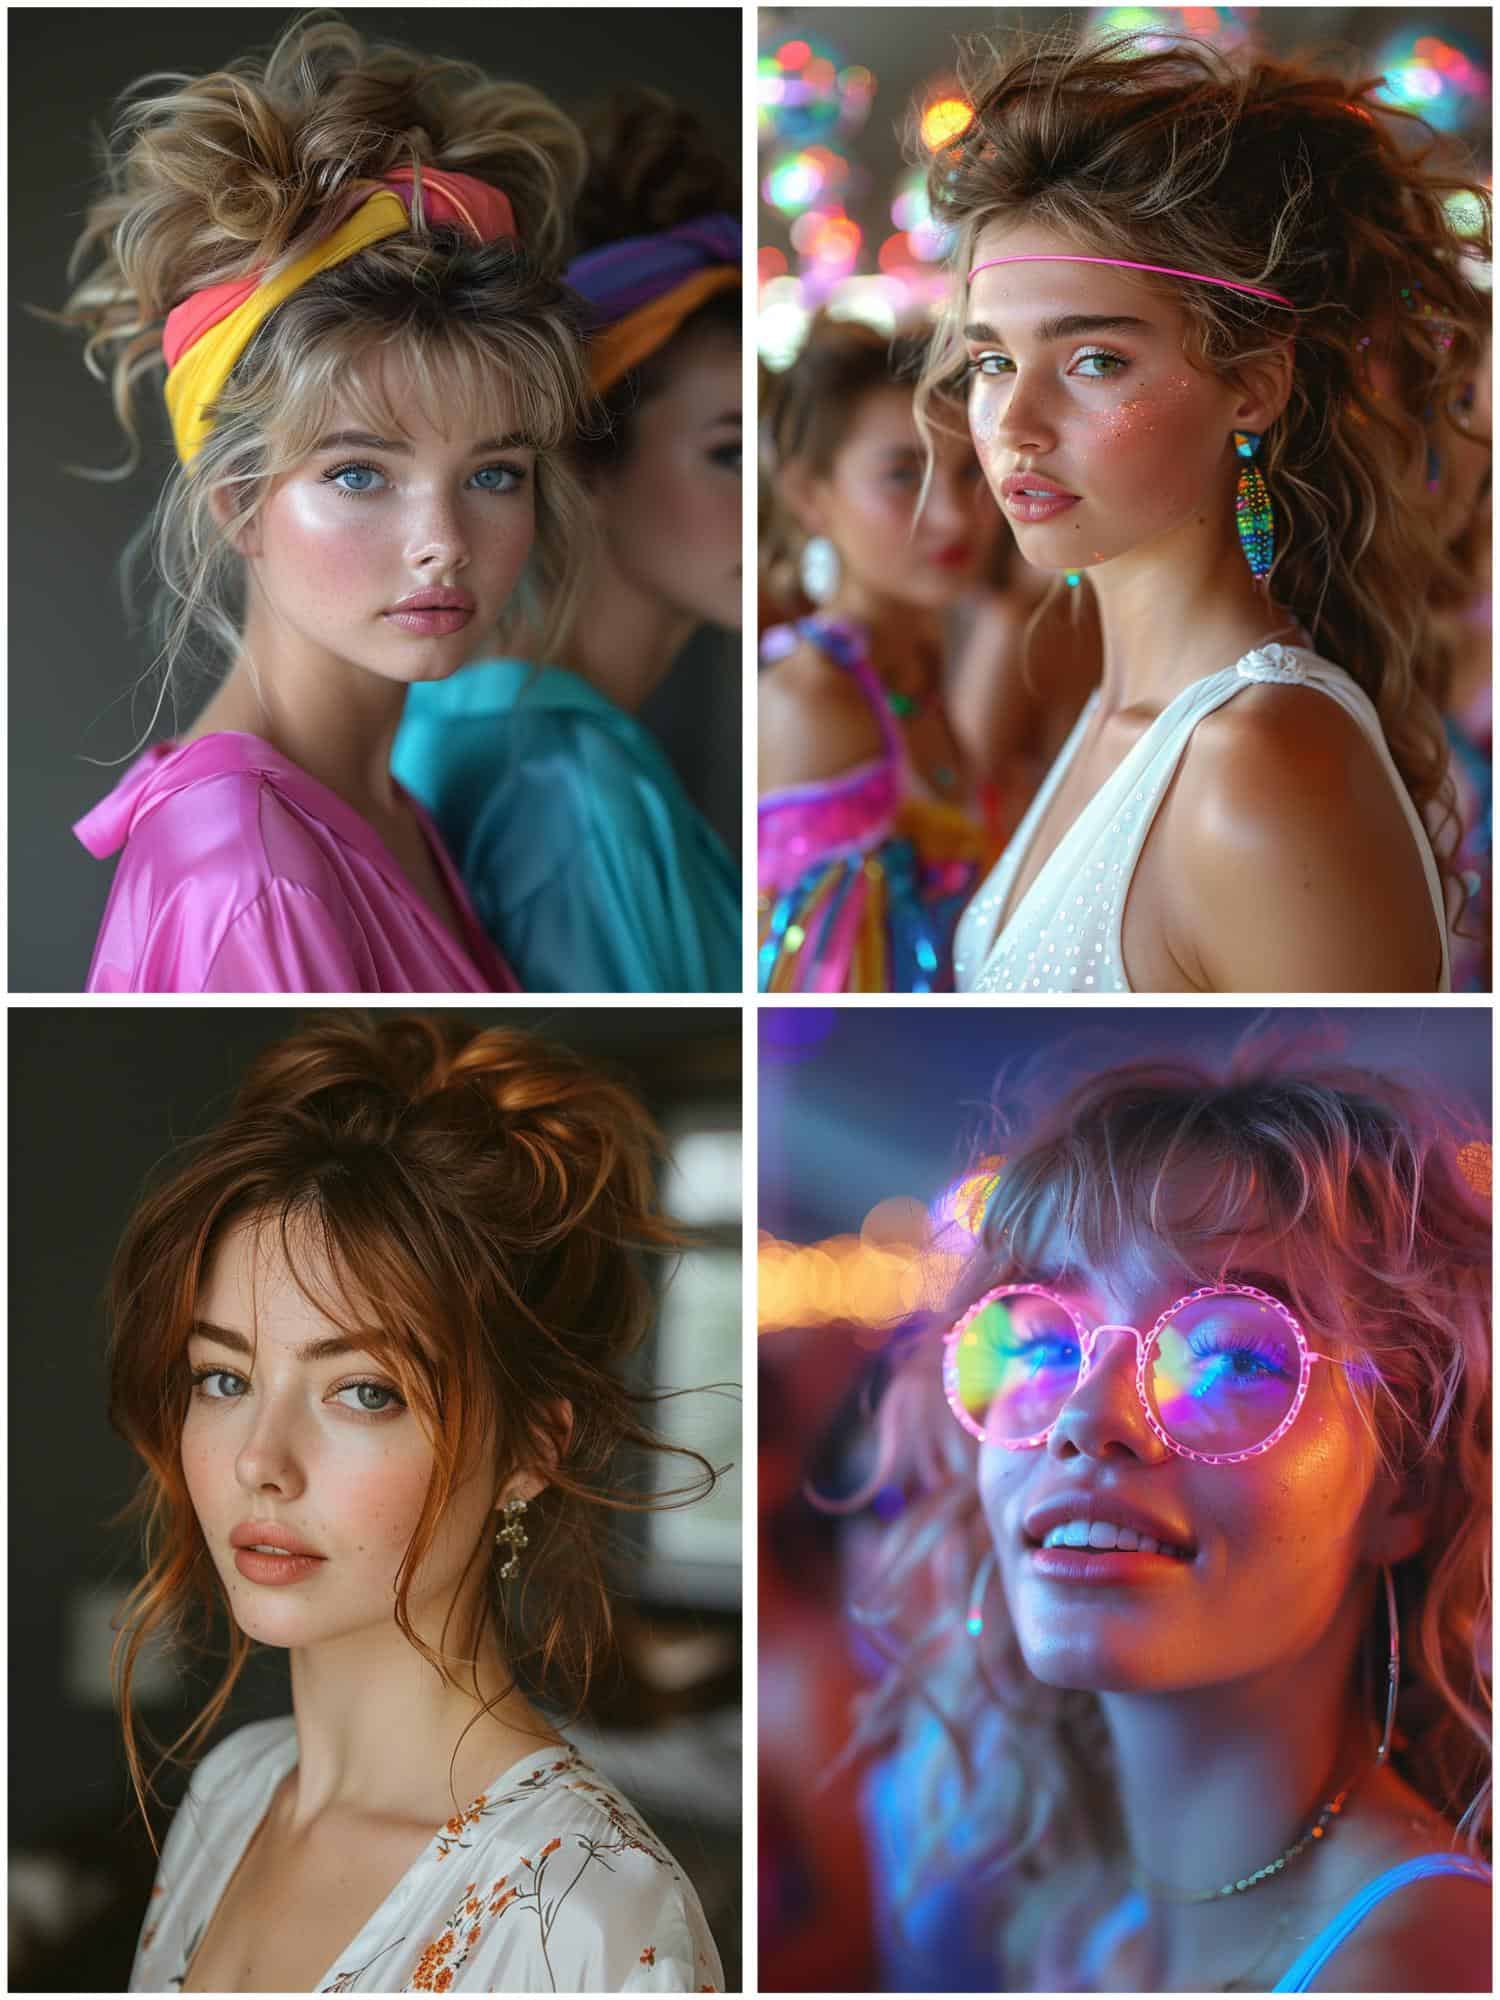 80s wedding theme ideas for embracing the big hair trend